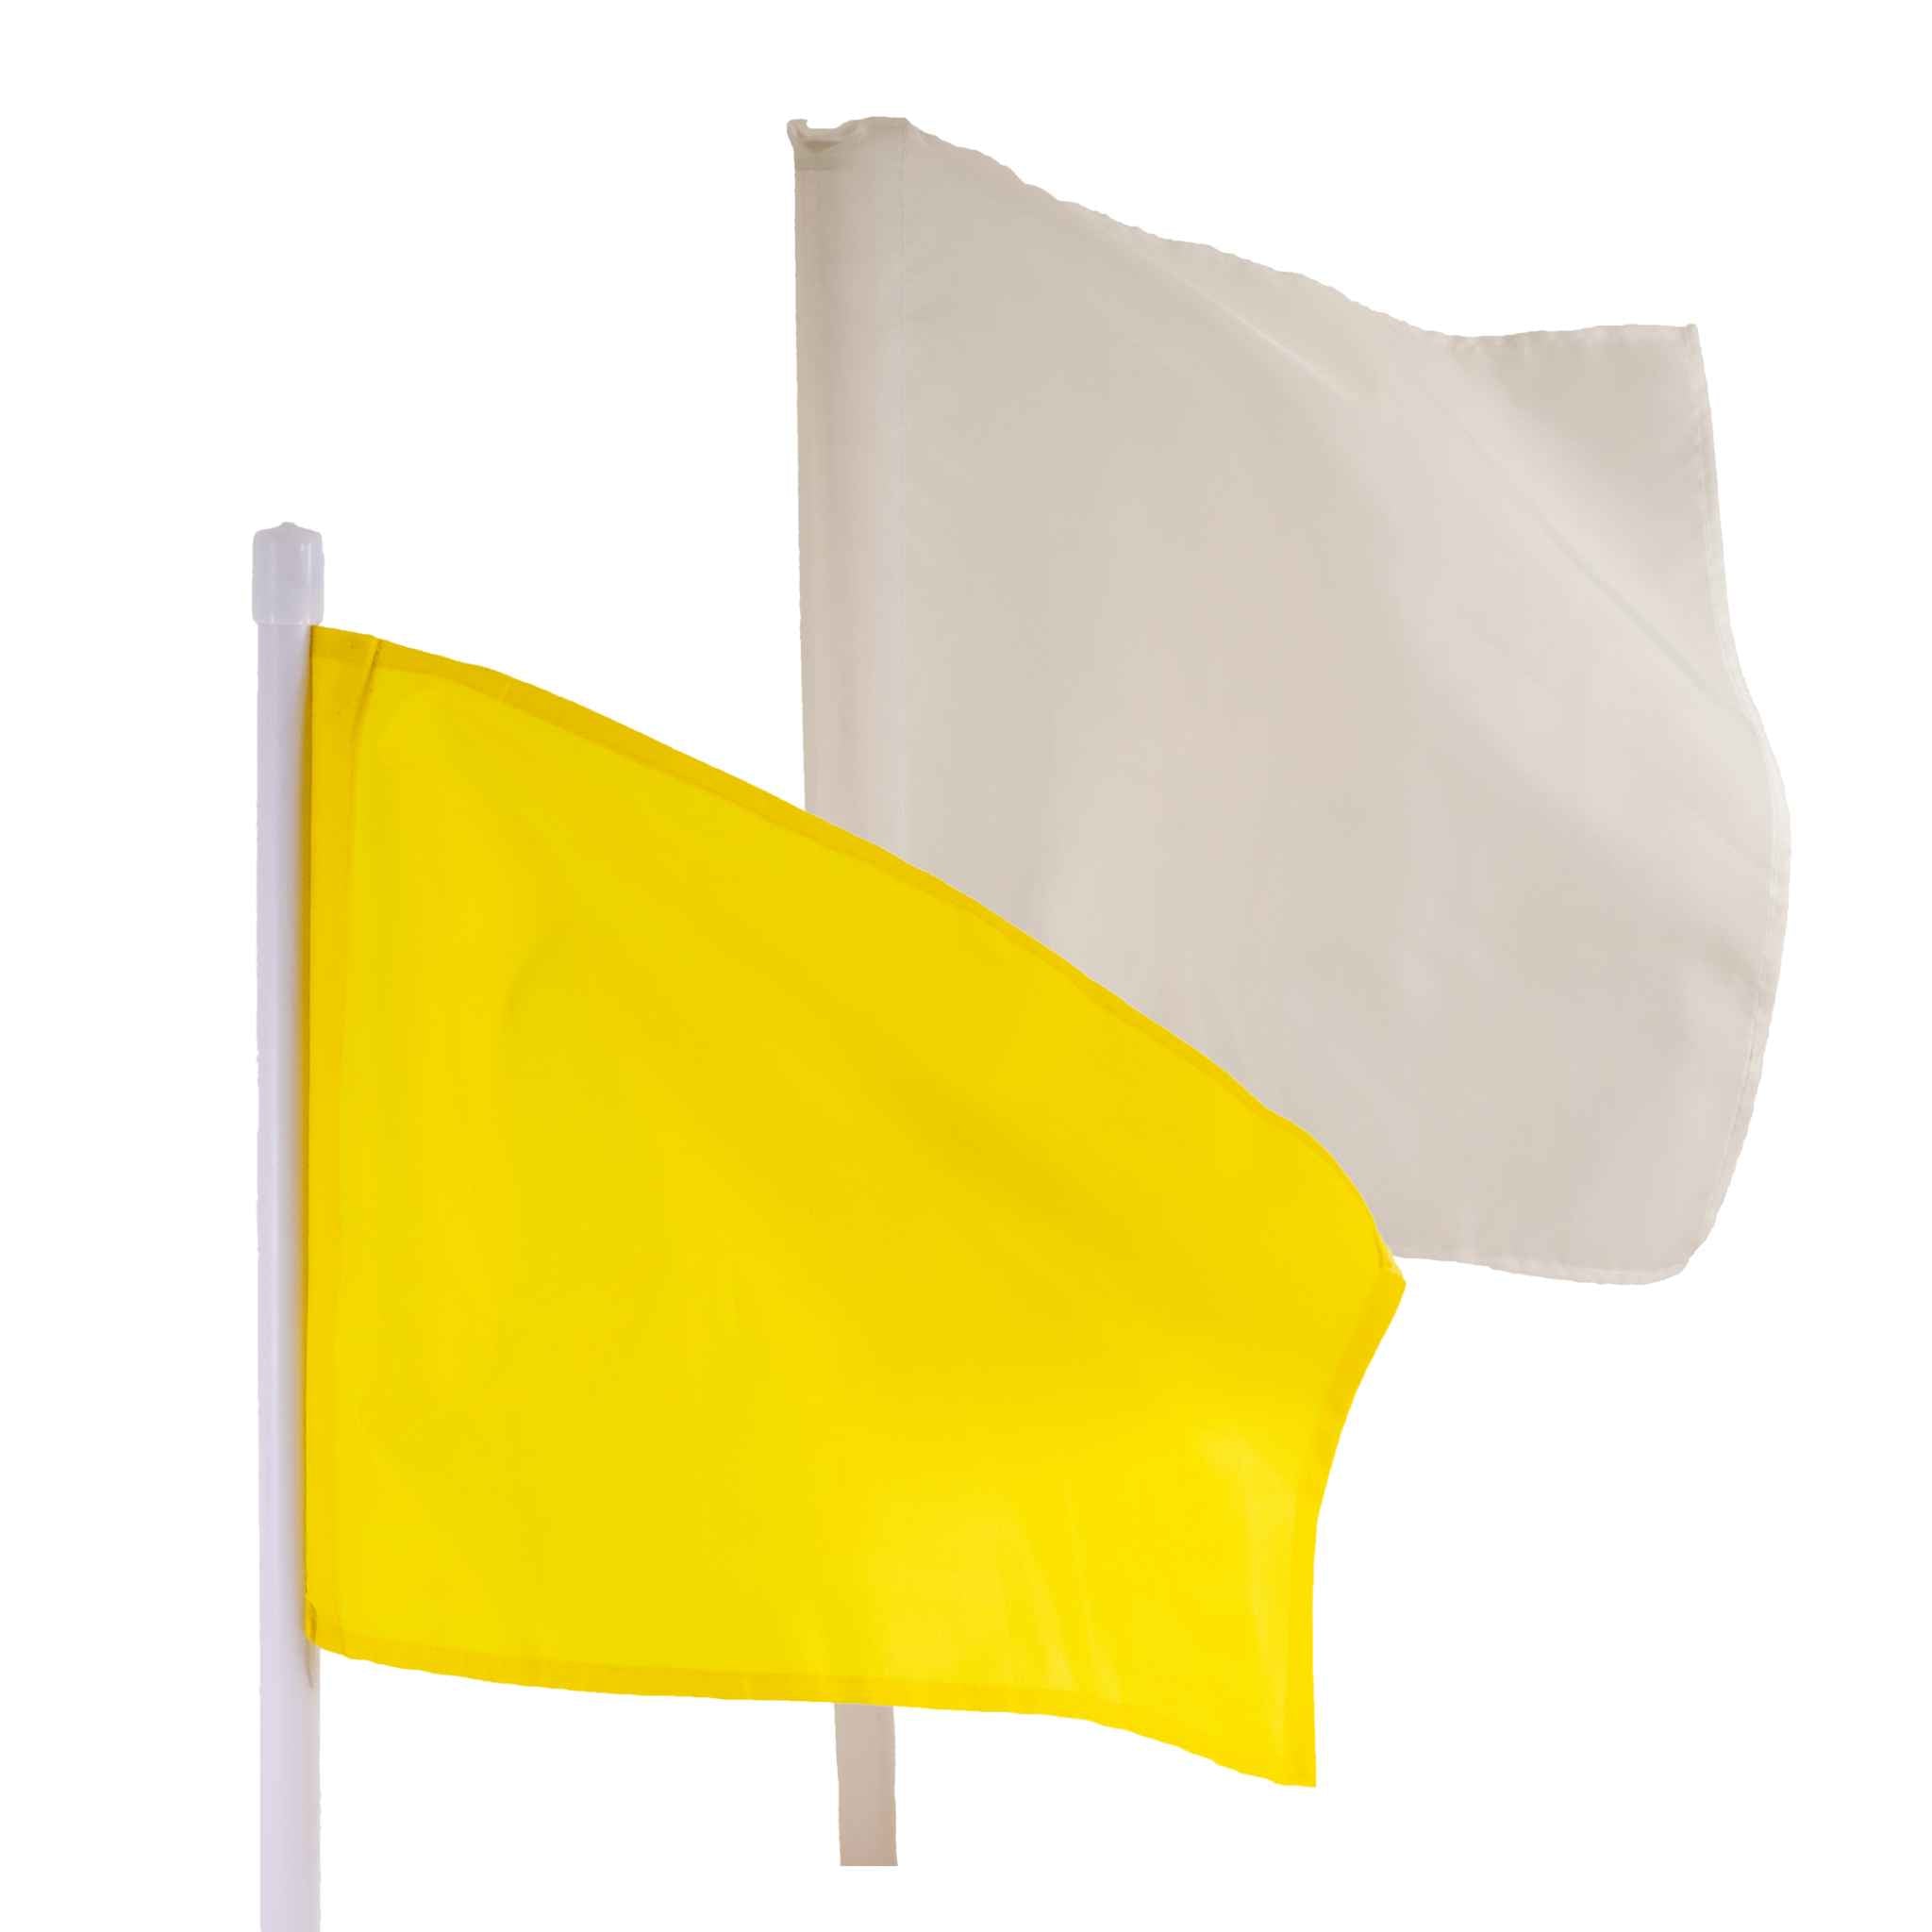 Fabric Flags for Athletics Officials and Sports Use | Simple solid handle | One Yellow, One White